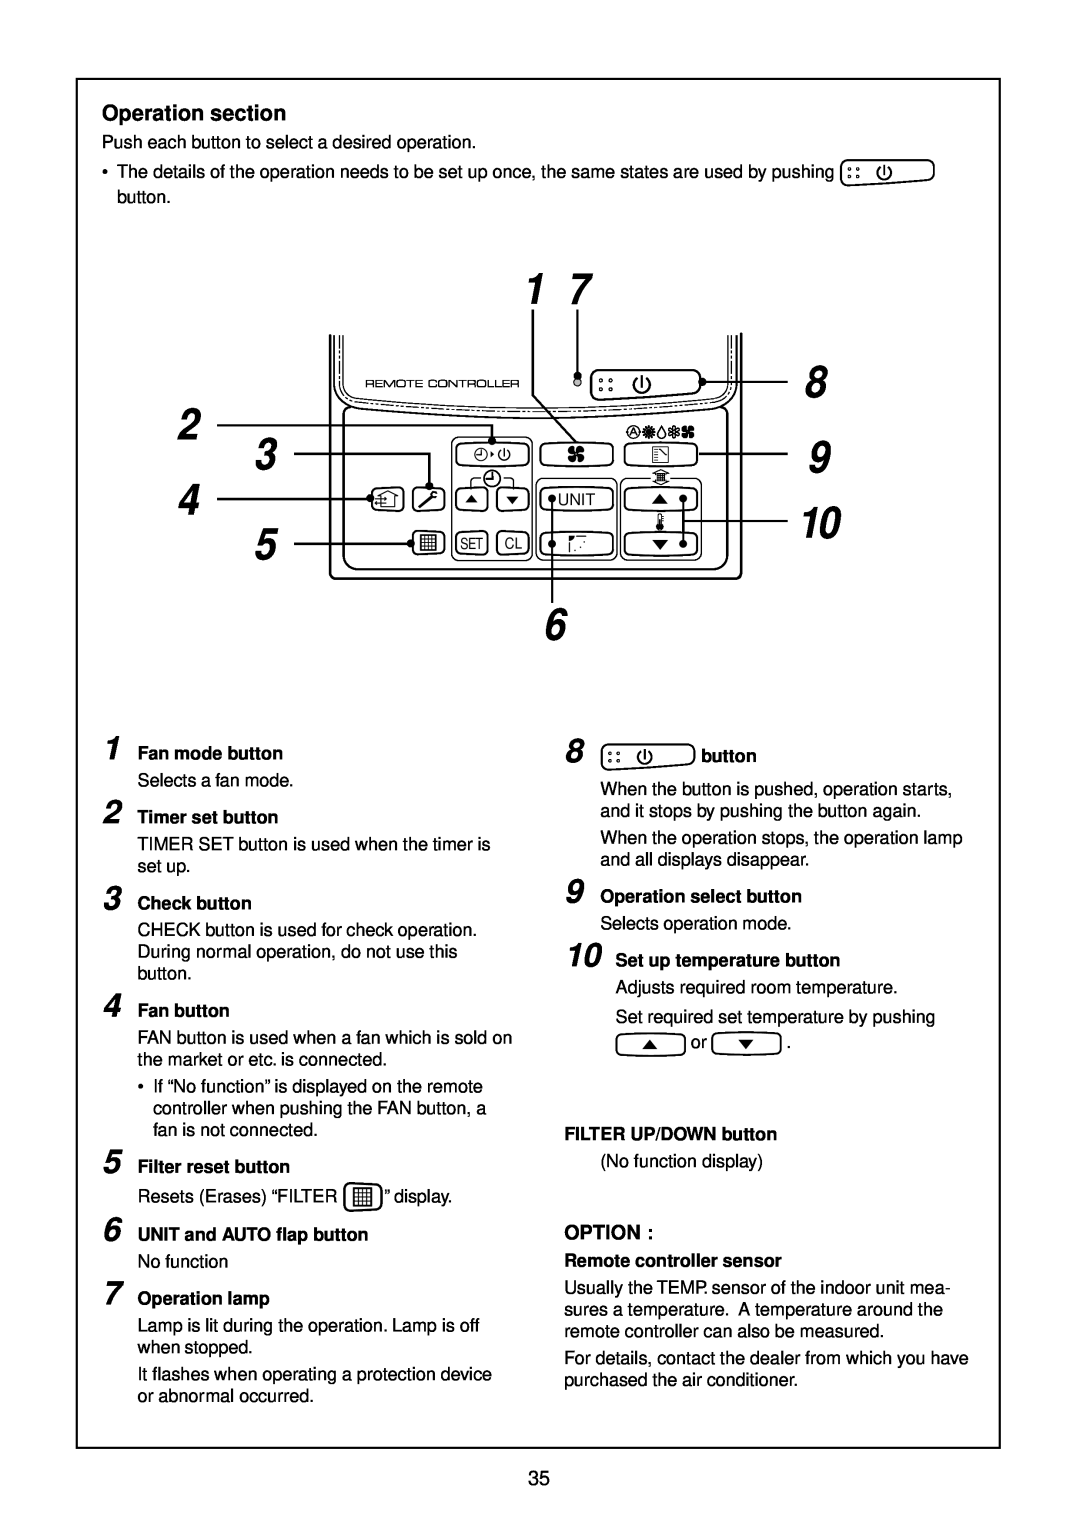 Toshiba R410A service manual Operation section, Option 